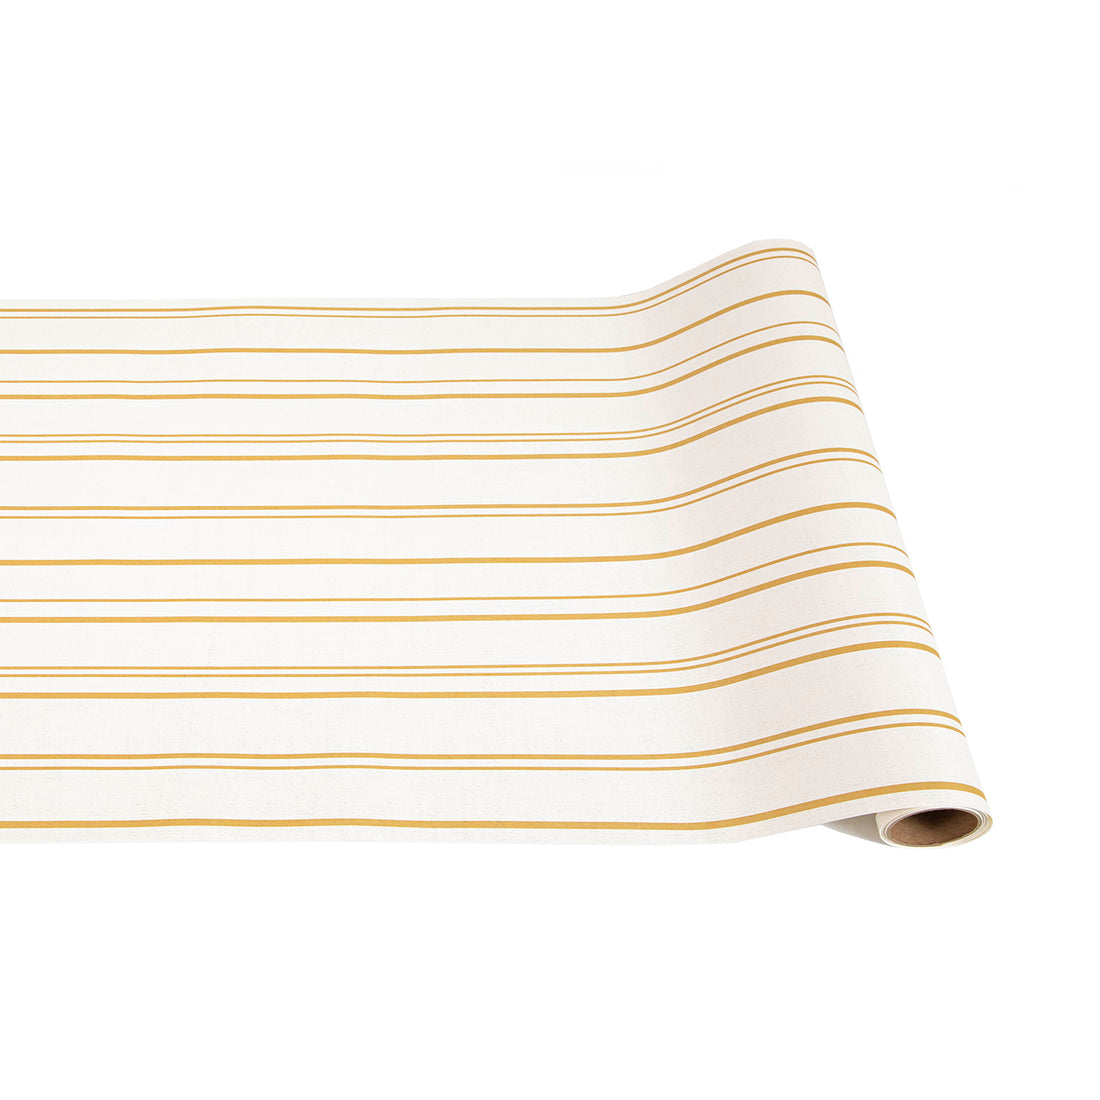 A white runner with muted gold stripes, thin and unevenly spaced, running down the length.